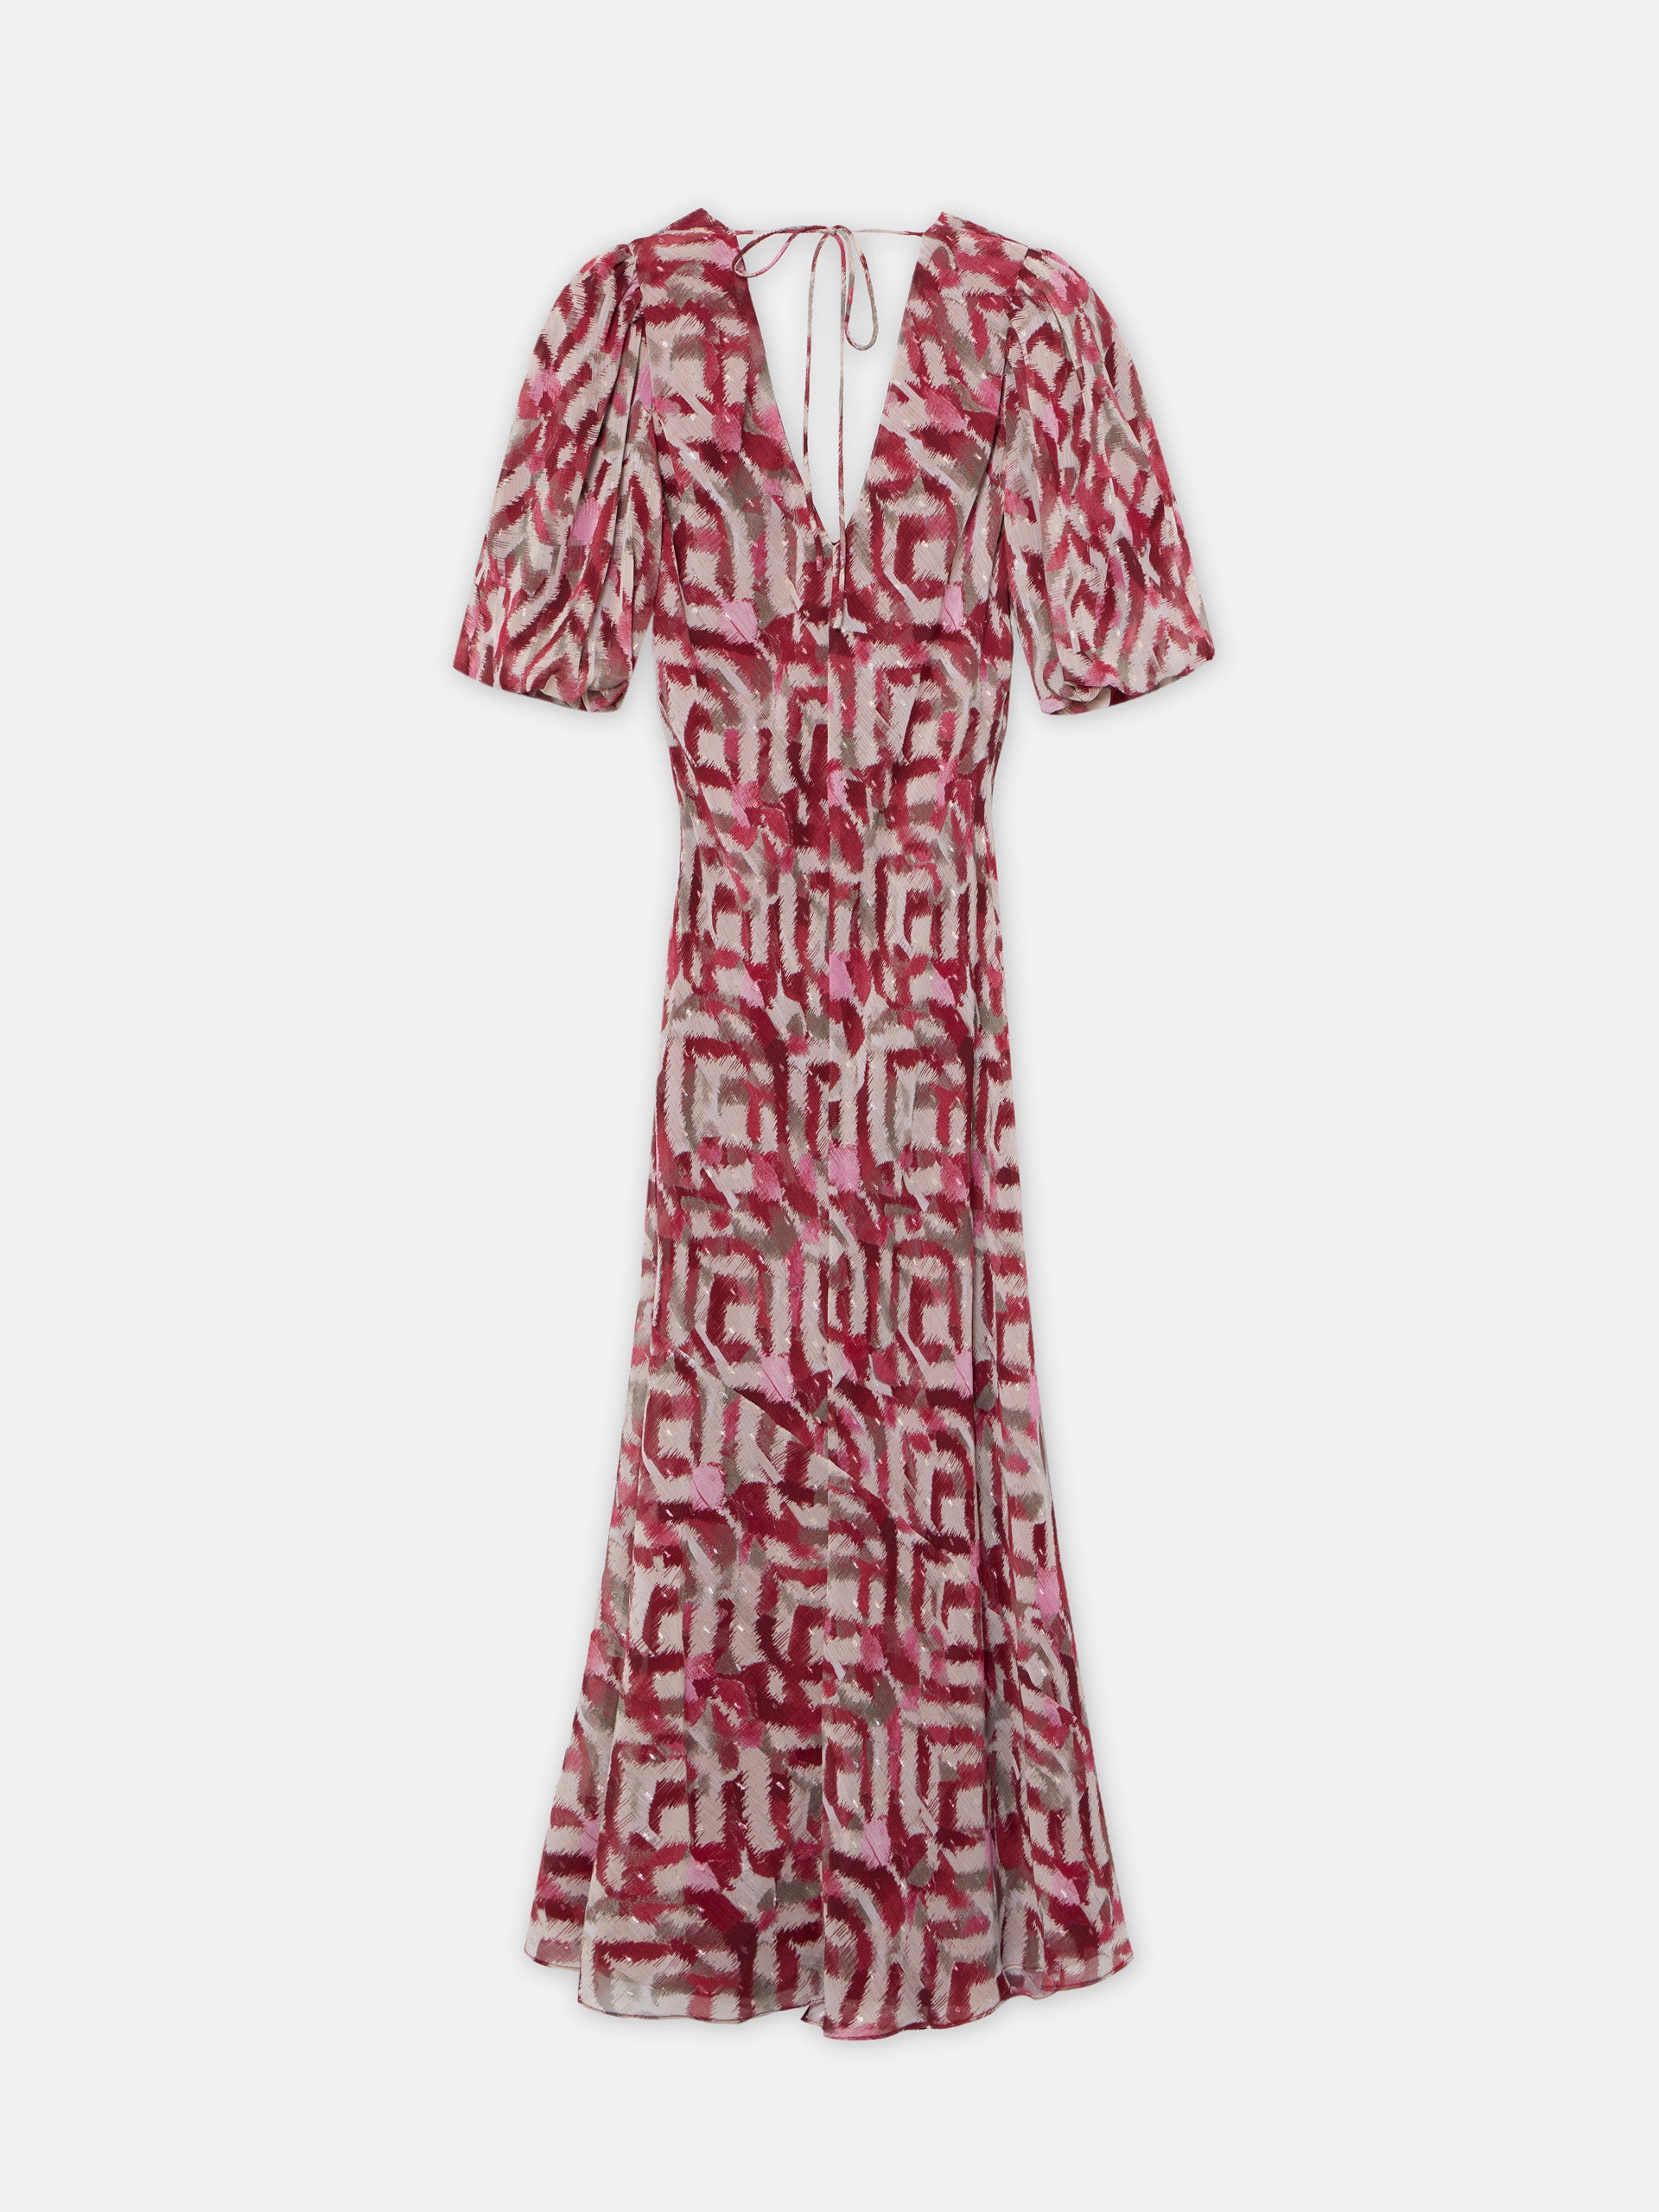 Unique red printed woman dress